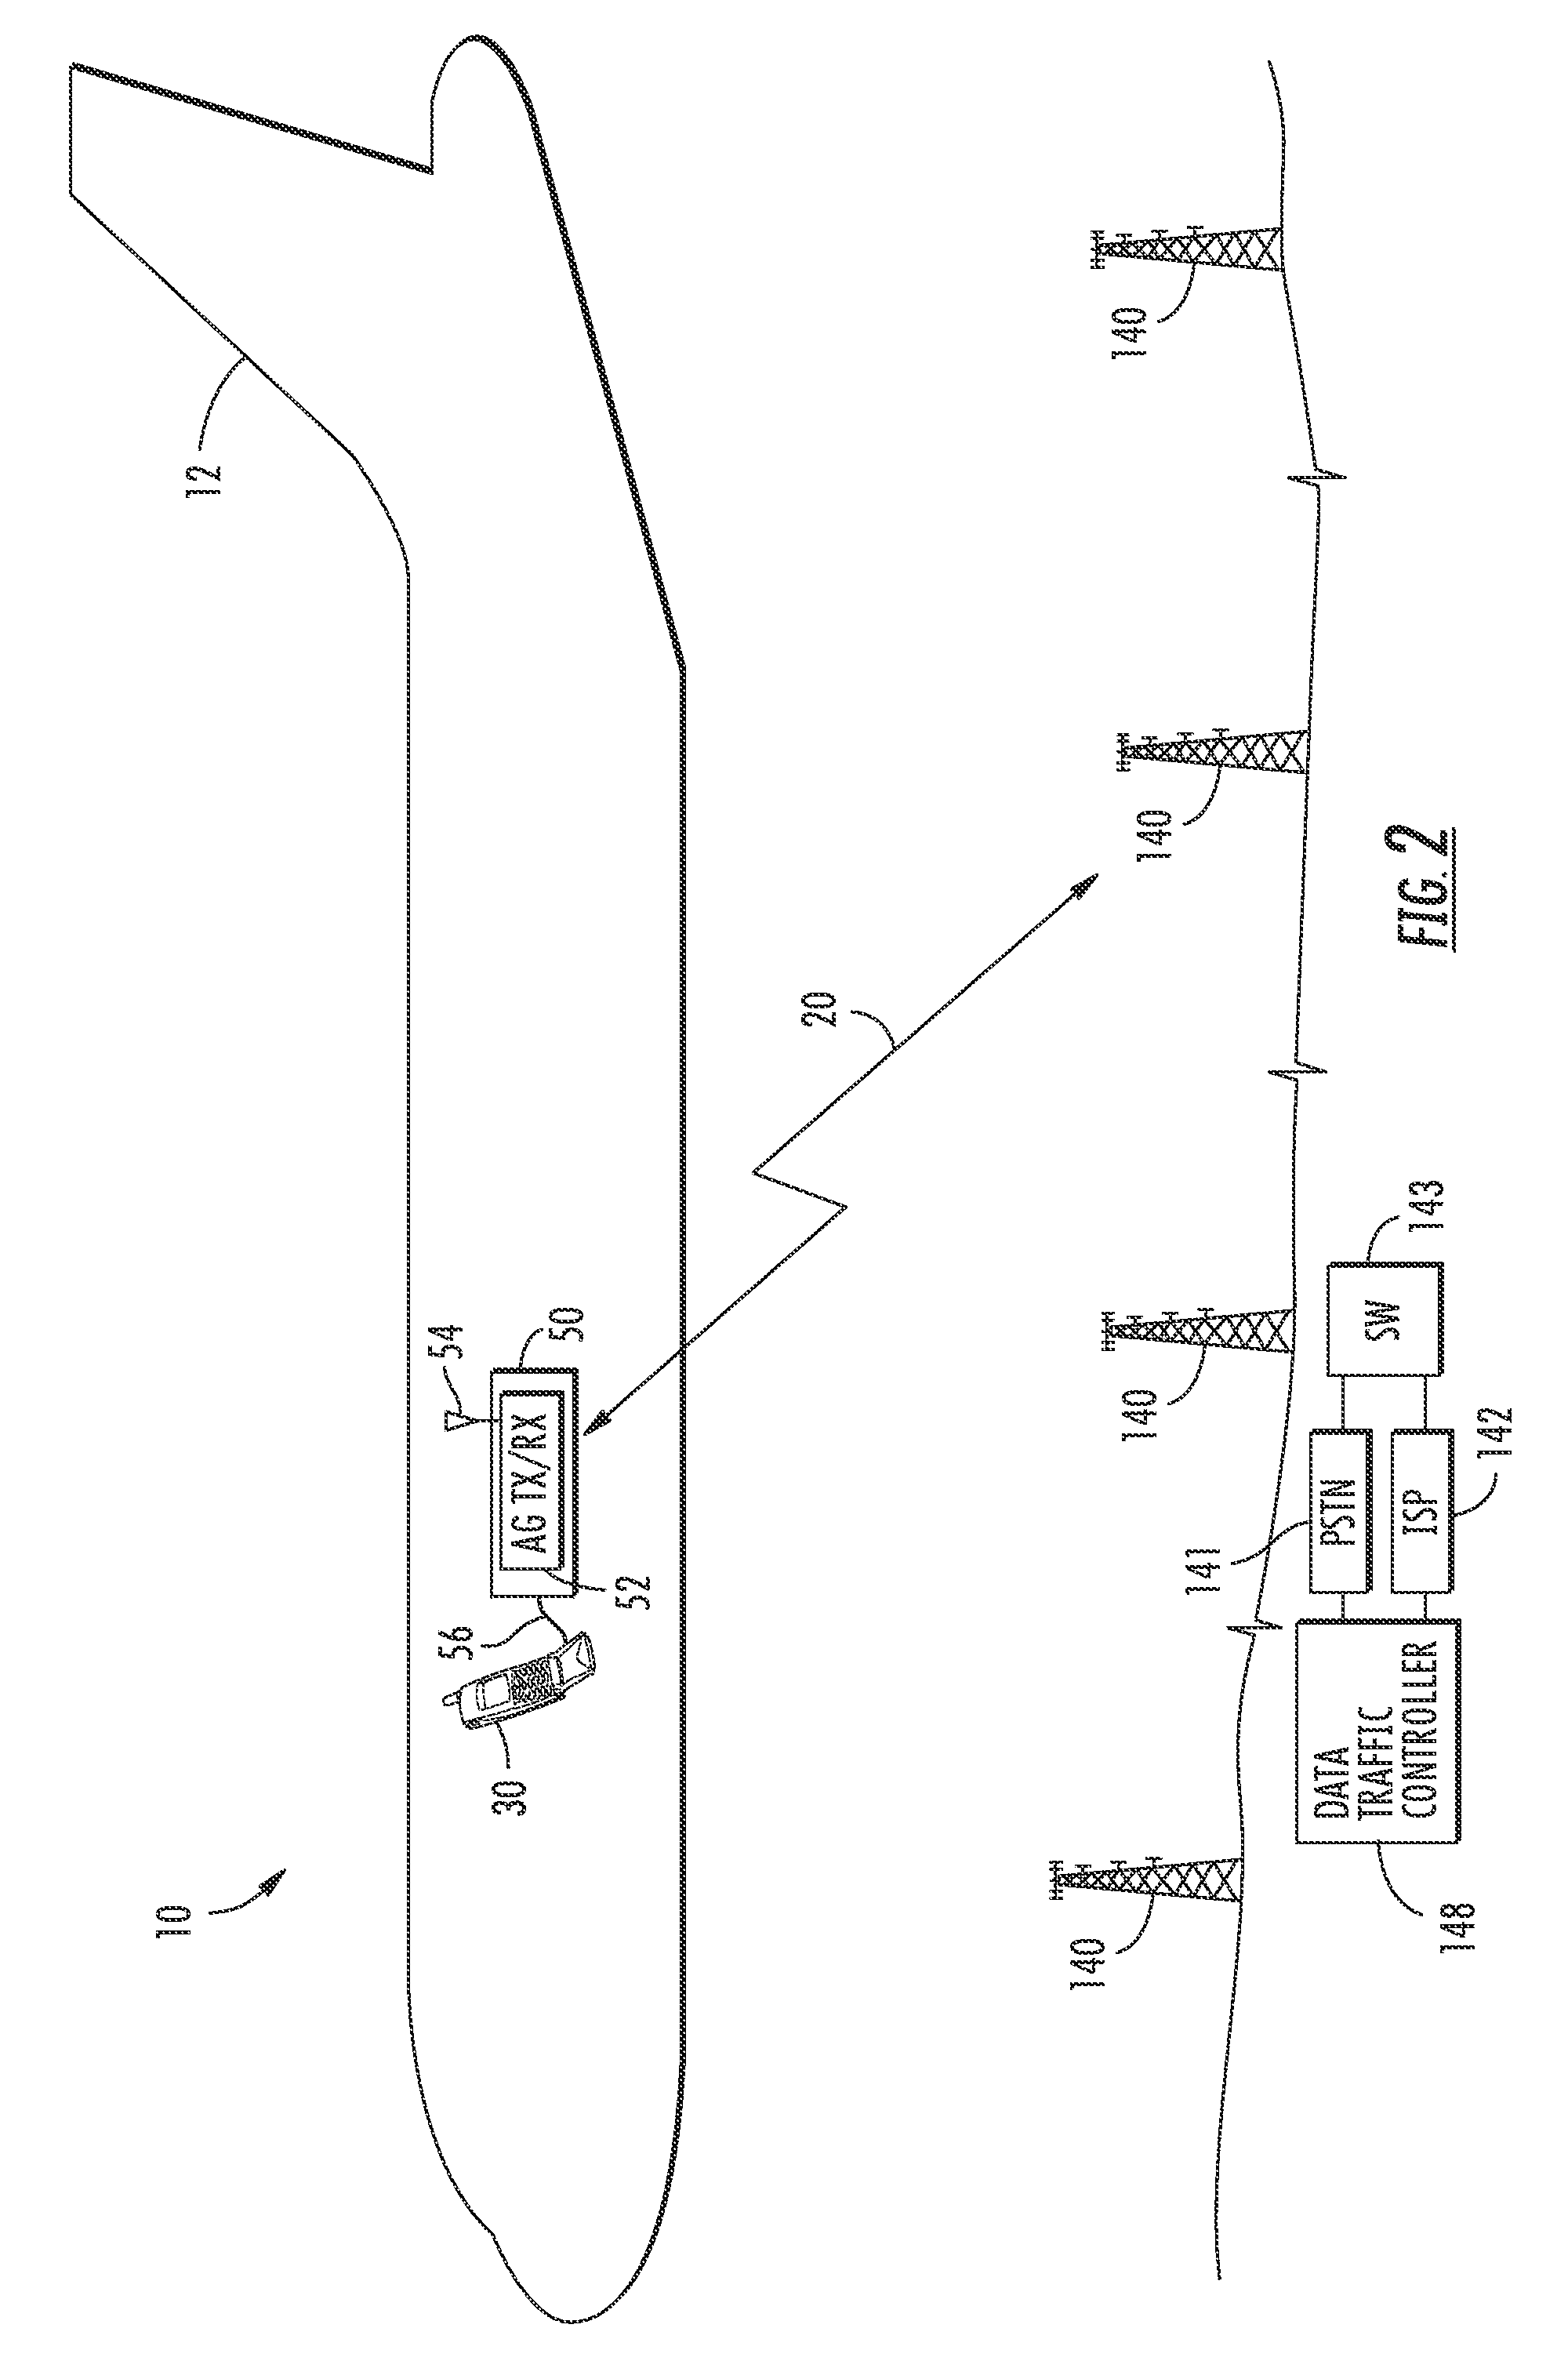 Aircraft communications system selectively allocating data communications channel capacity and associated methods